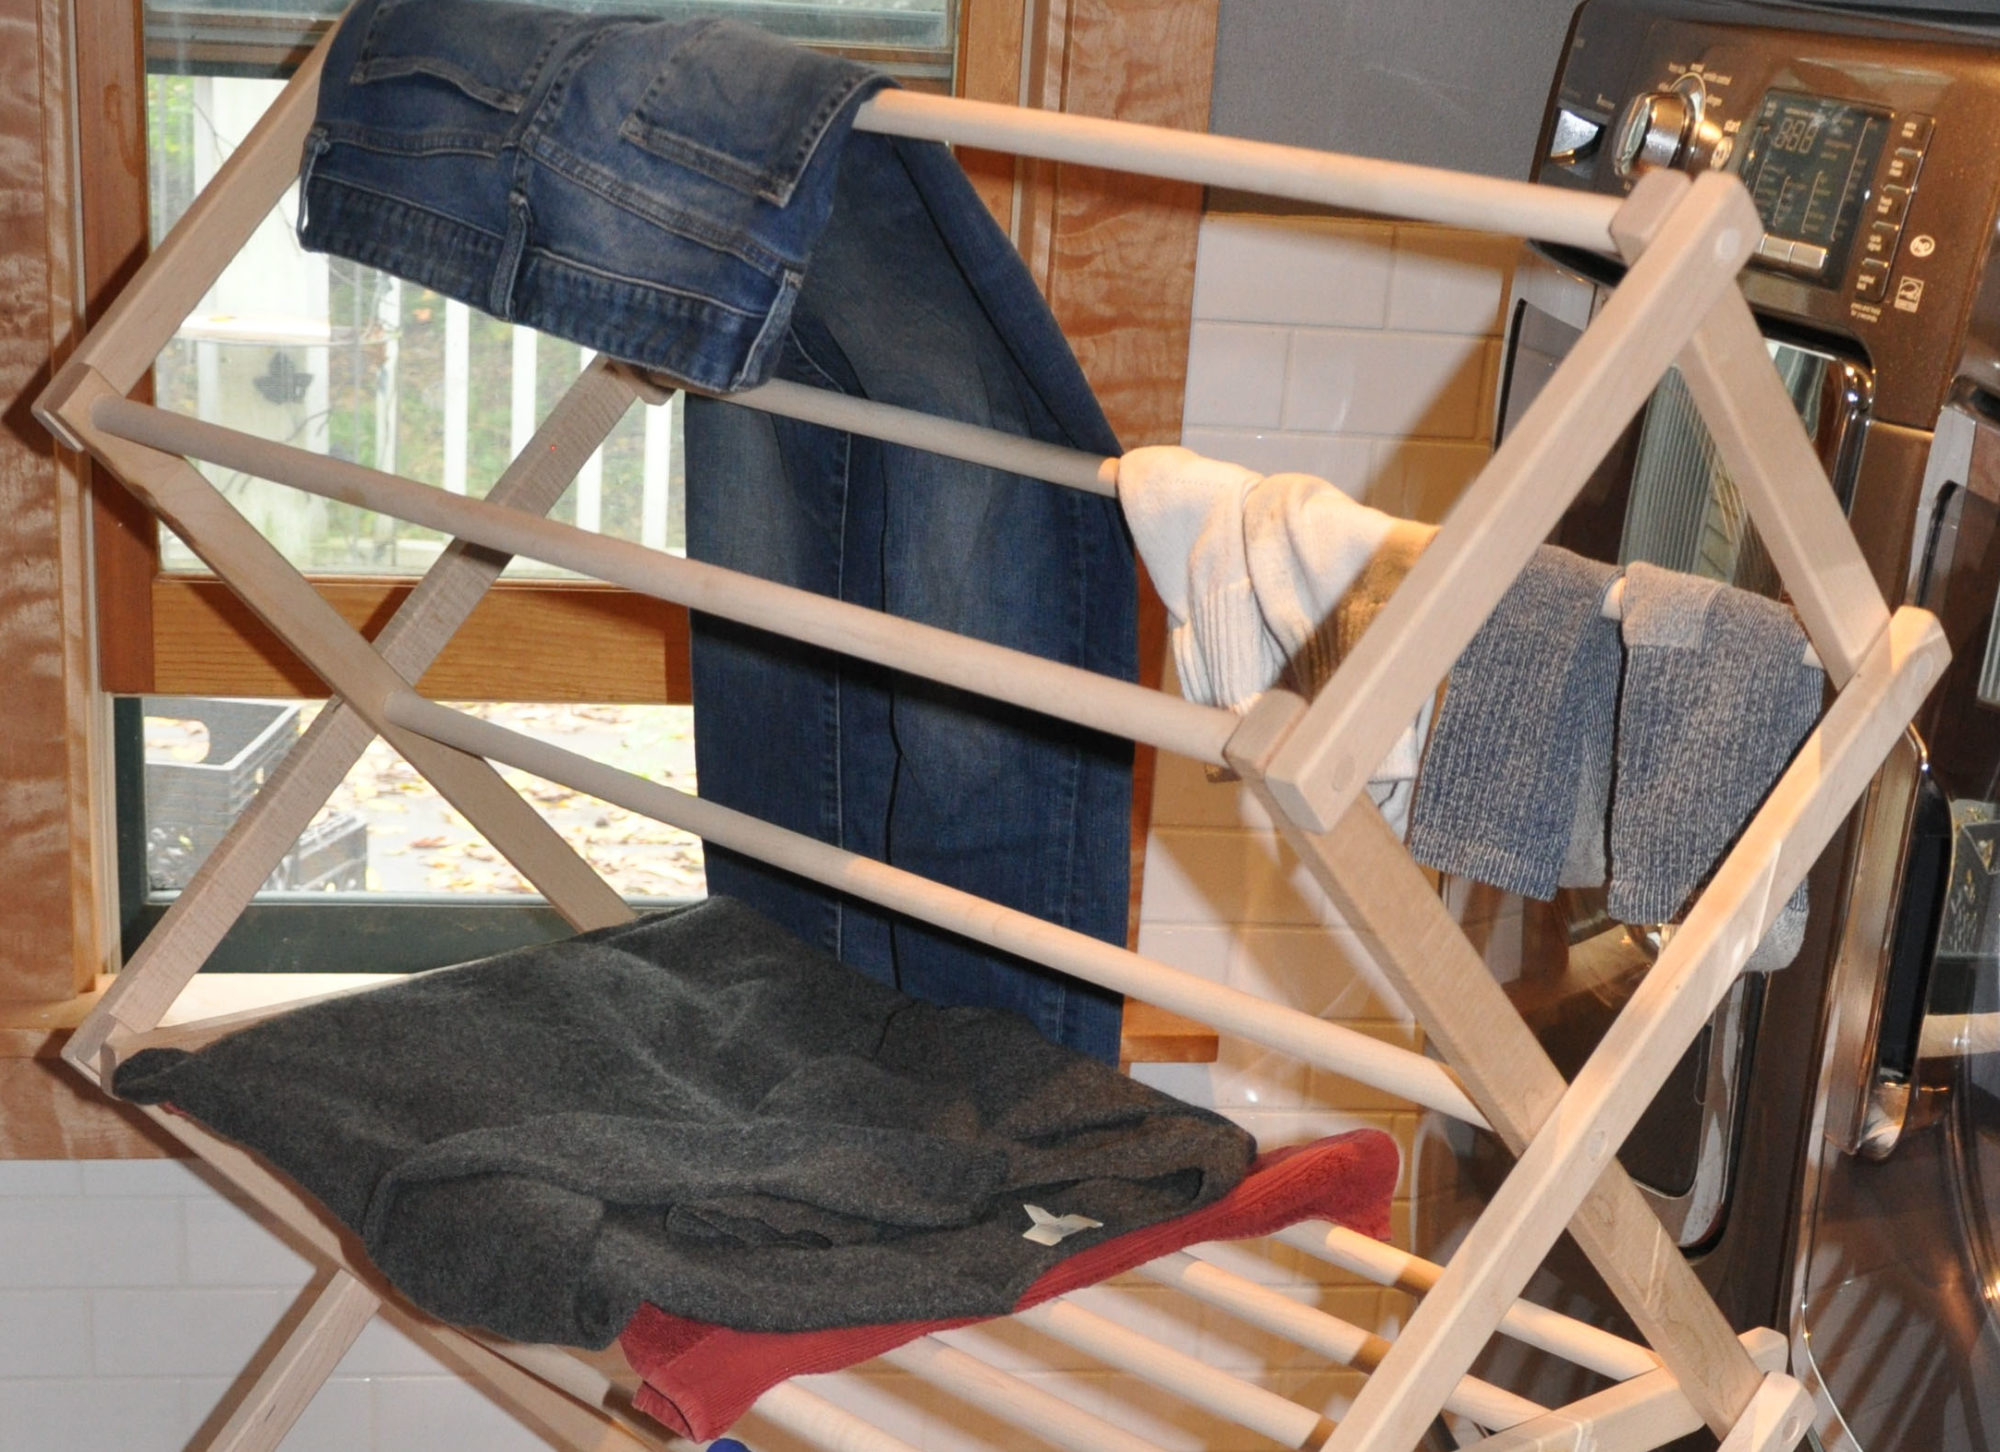 Wooden Clothes Drying Rack: A Laundry Room Essential by Benson